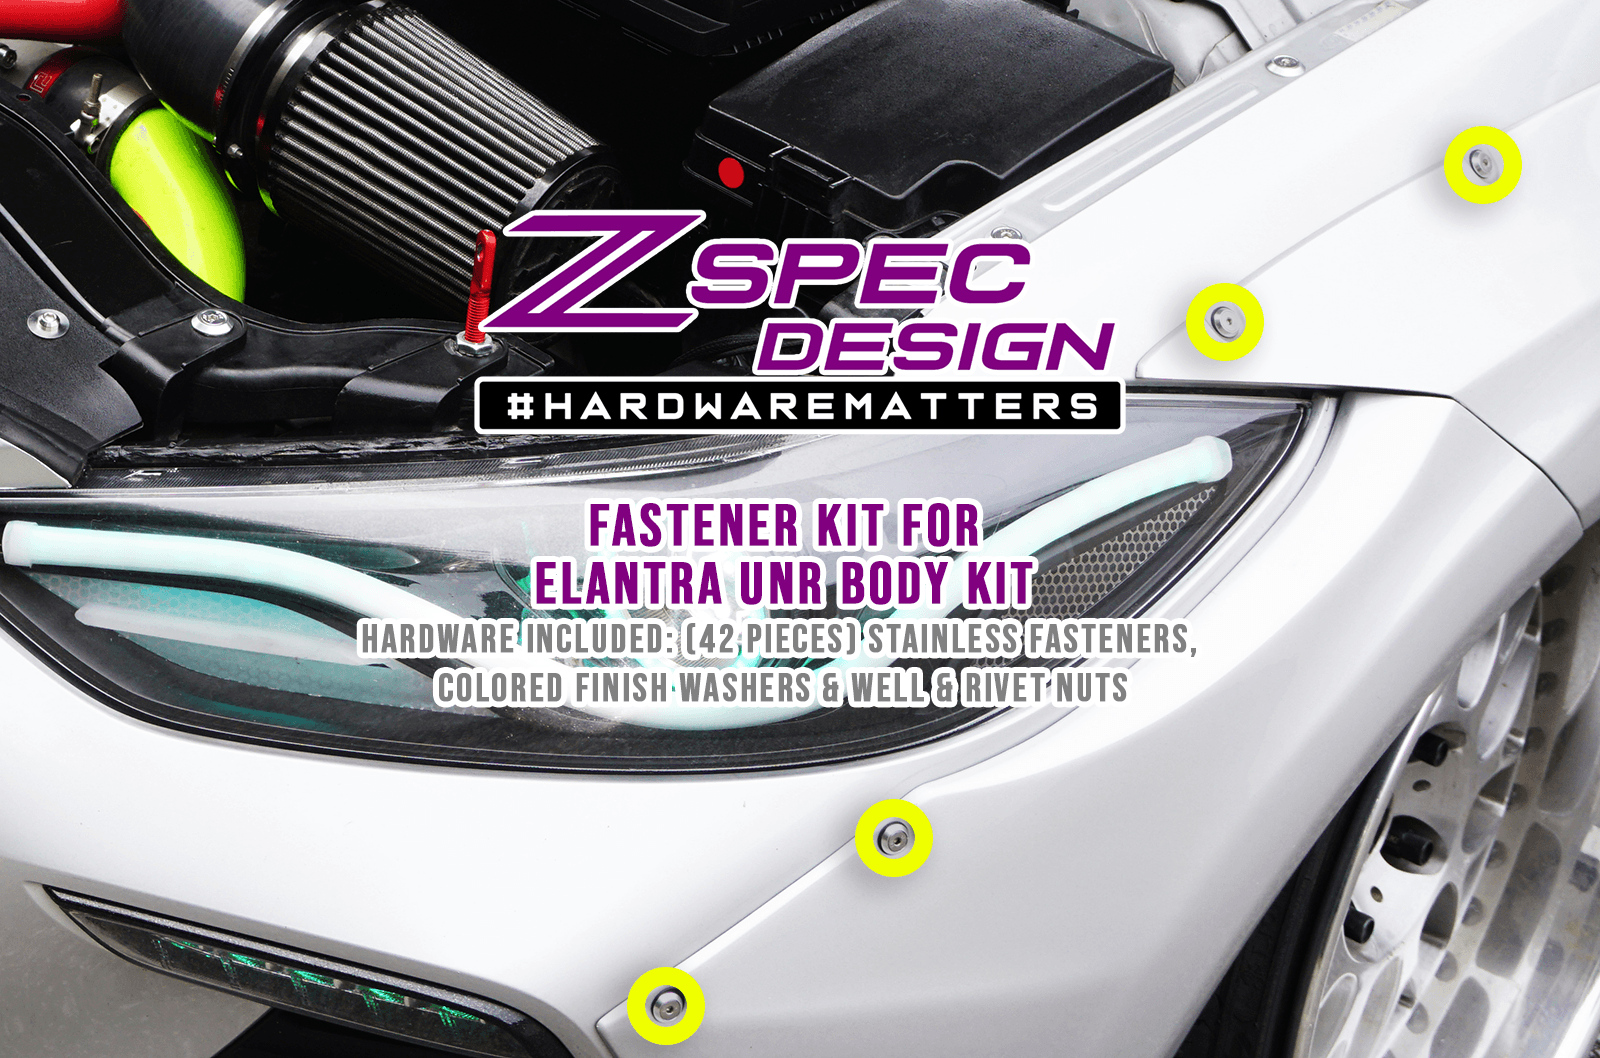 ZSPEC Body-Kit Fastener Hyundai Elantra UNR Body Kit Low-Profile M5x20mm Stainless/Billet, Sold per Each Flares, Over Fender, Body Element, Wings, Arches - Titanium / Billet / Stainless - Black, Burned, Gold, Purple, Silver Raw, Polished - Dress Up Bolts Hardware Washers Finish